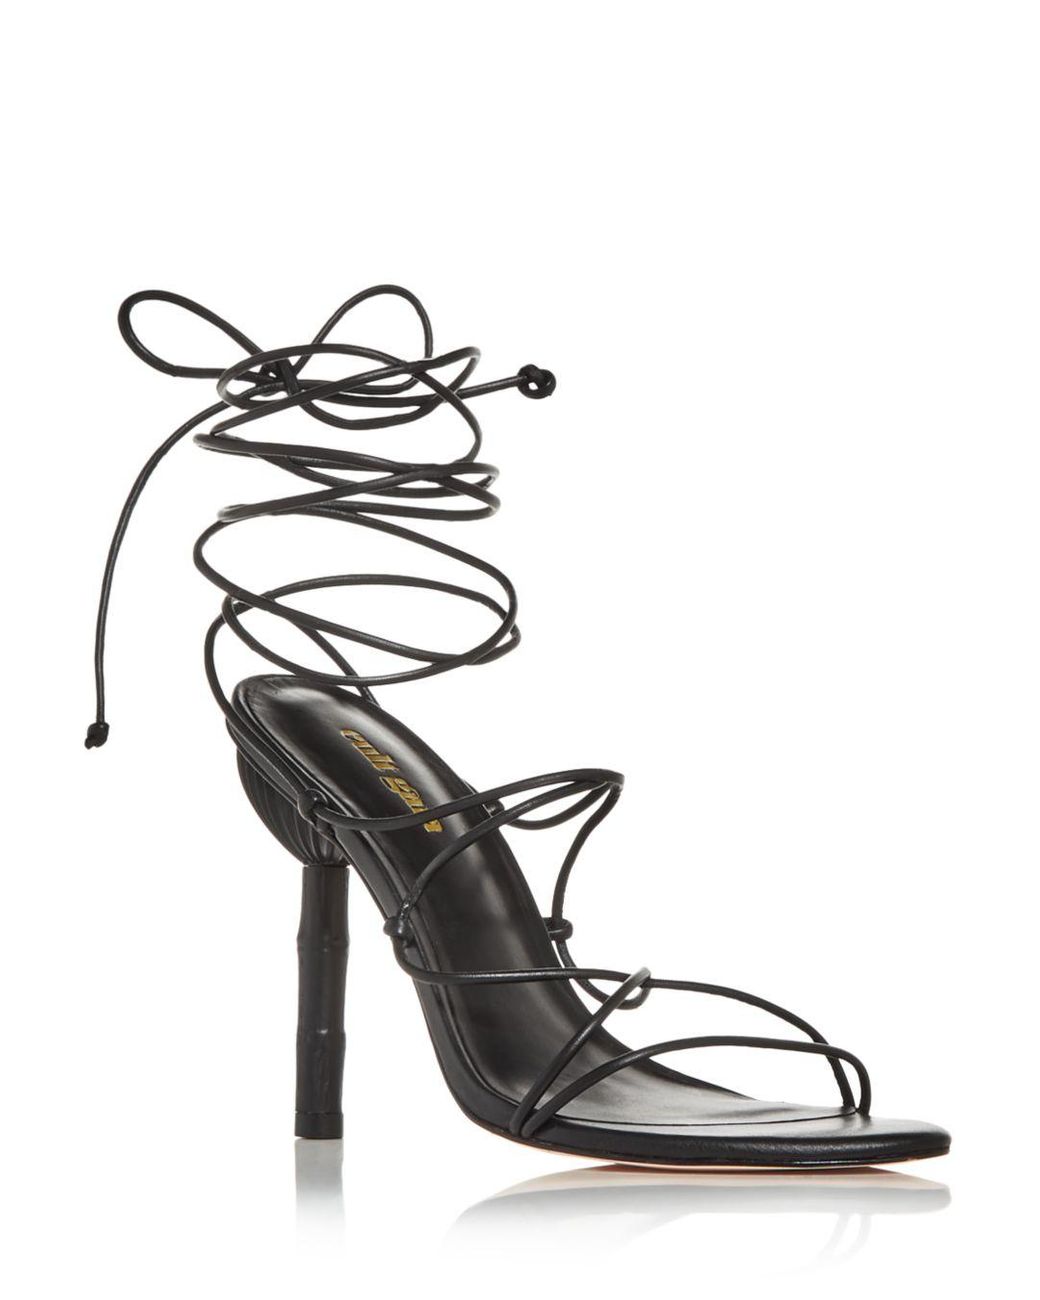 Cult Gaia Leather Soleil Lace Up High Heel Sandals in Black - Lyst